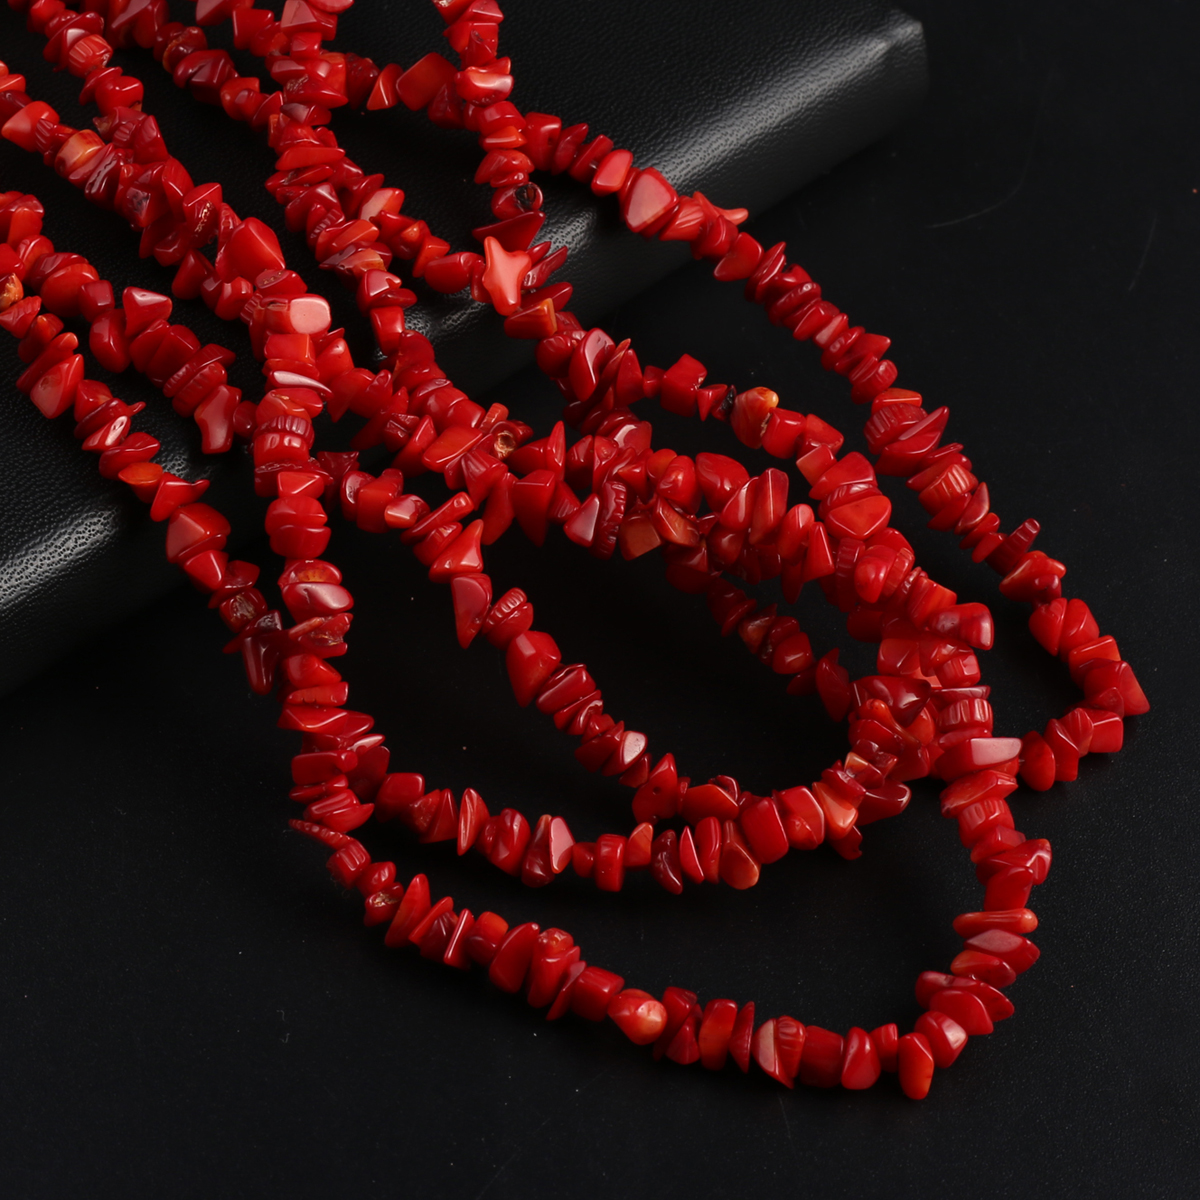 Artificial Coral Beads Sea Bamboo Synthetic Irregular Coral Beads For Jewelry Making DIY Necklace Bracelet Earrings Accessory